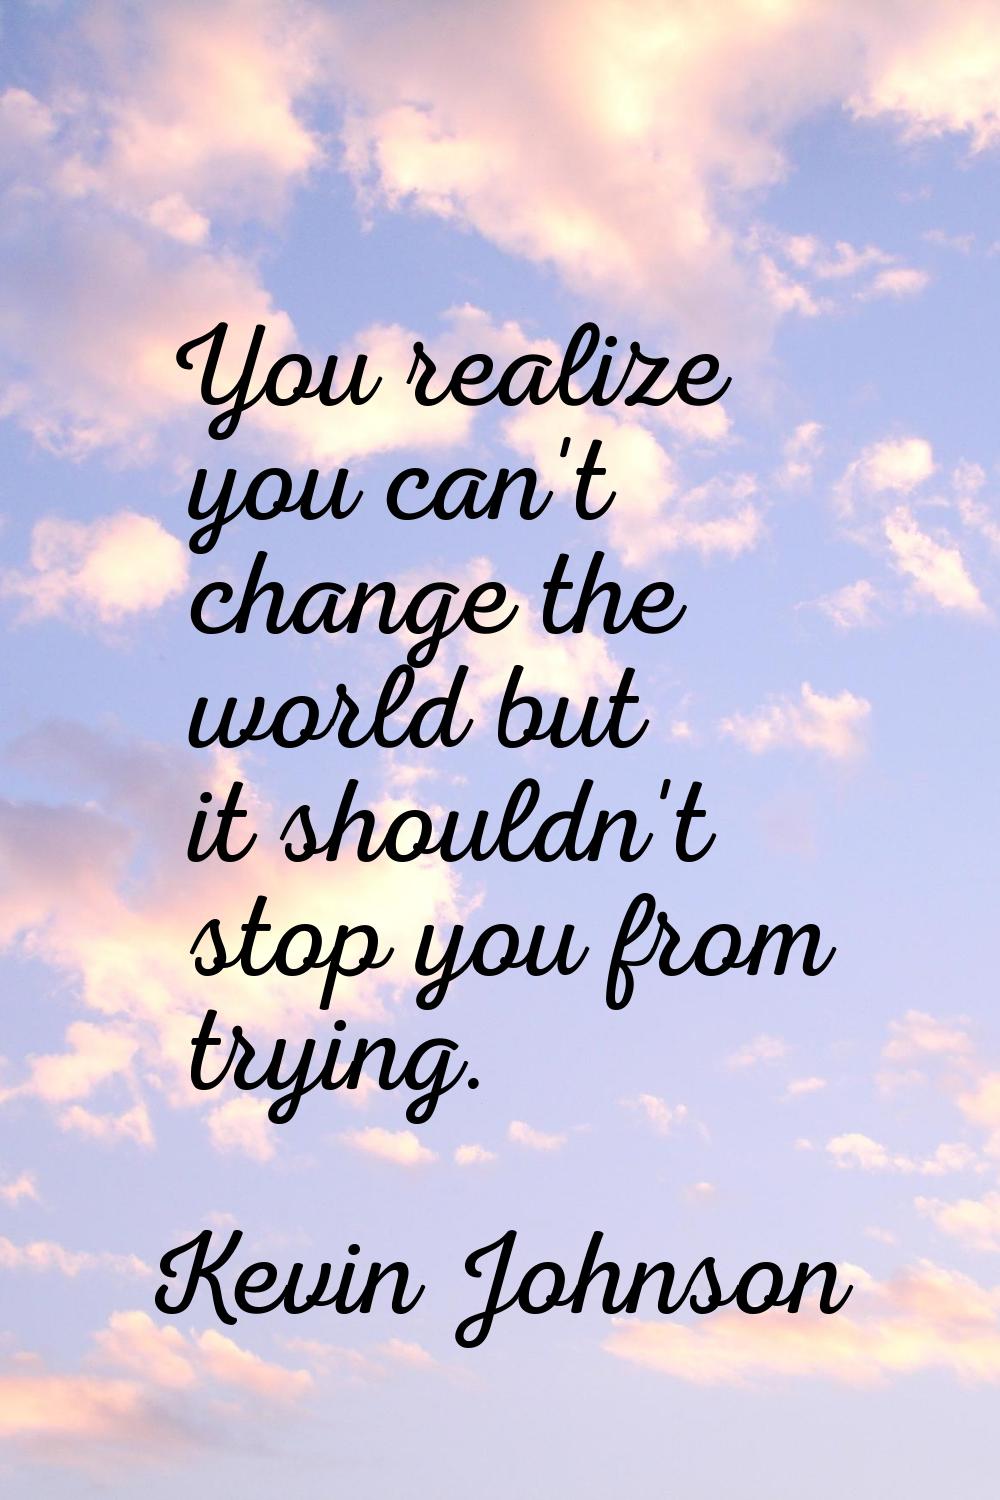 You realize you can't change the world but it shouldn't stop you from trying.